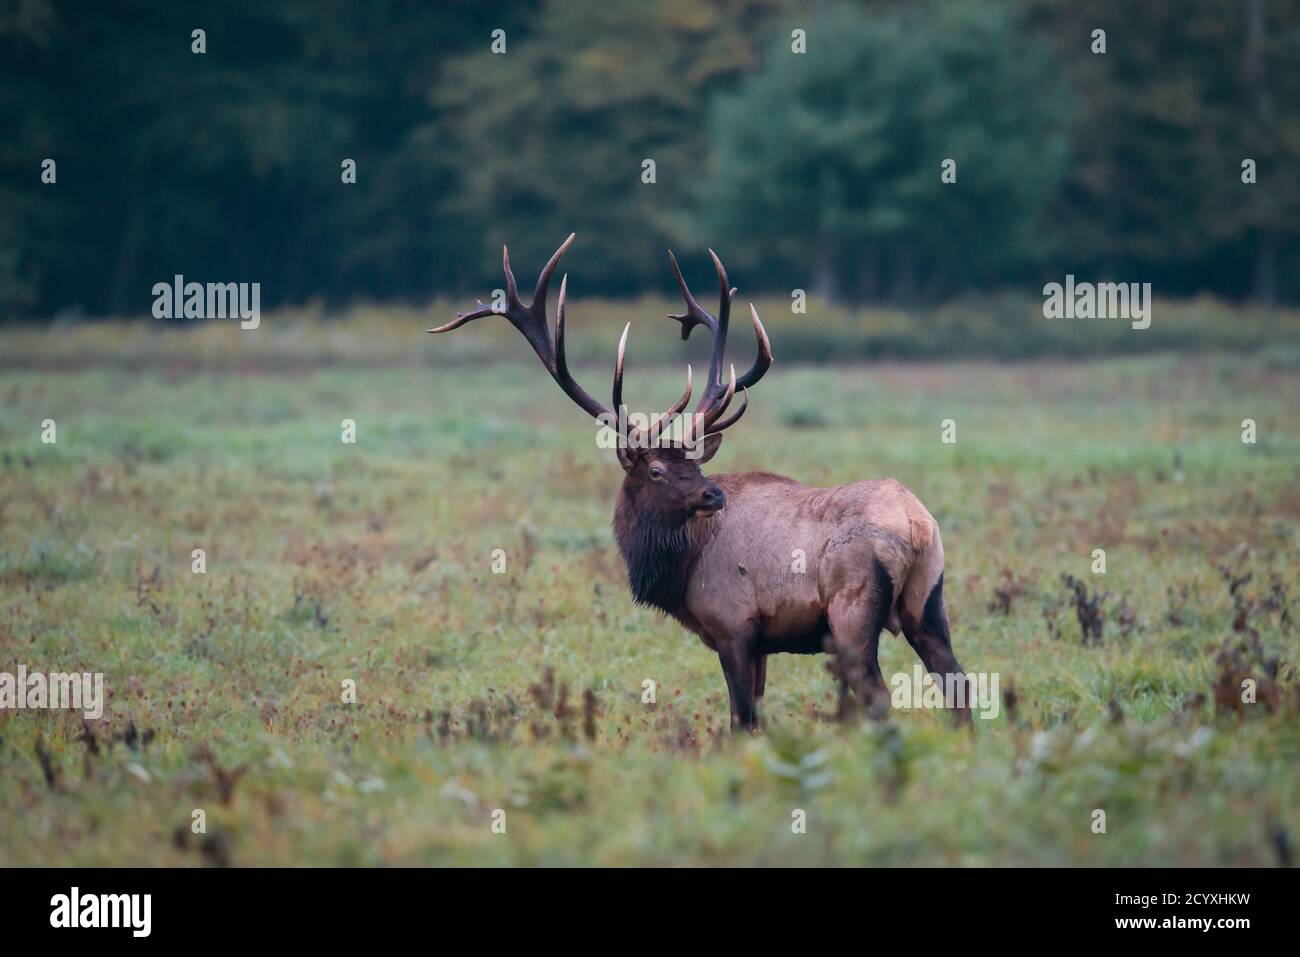 A large bull elk in a field in Benzette, PA, USA Stock Photo